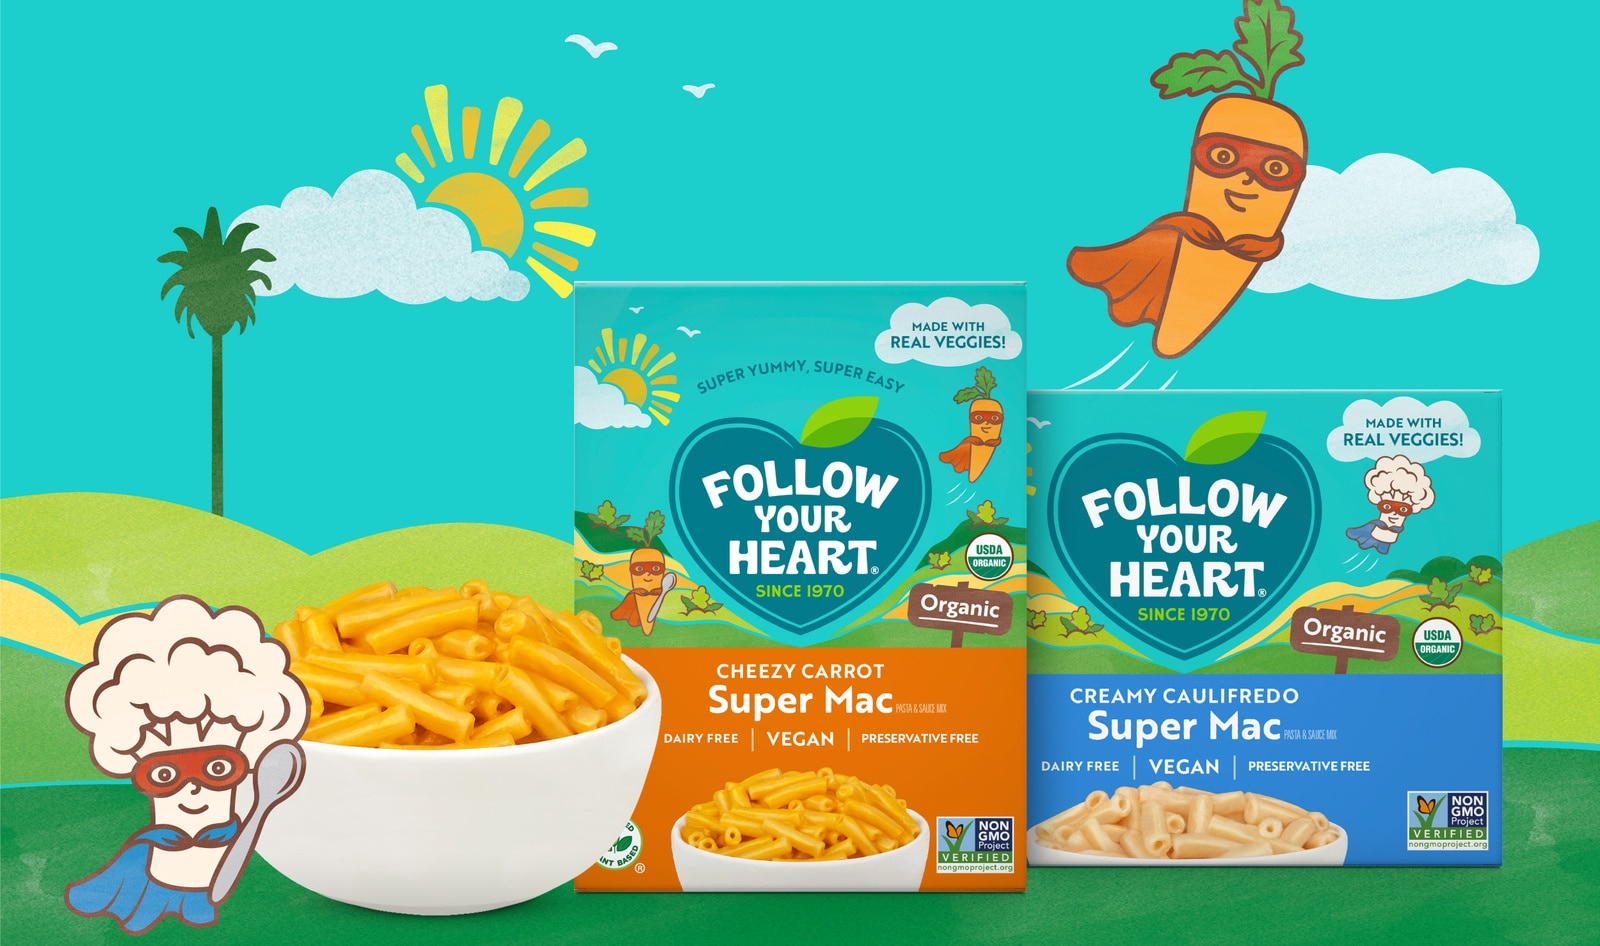 Follow Your Heart Just Launched Its First Vegan Mac and Cheese. And It's Loaded With Veggies.